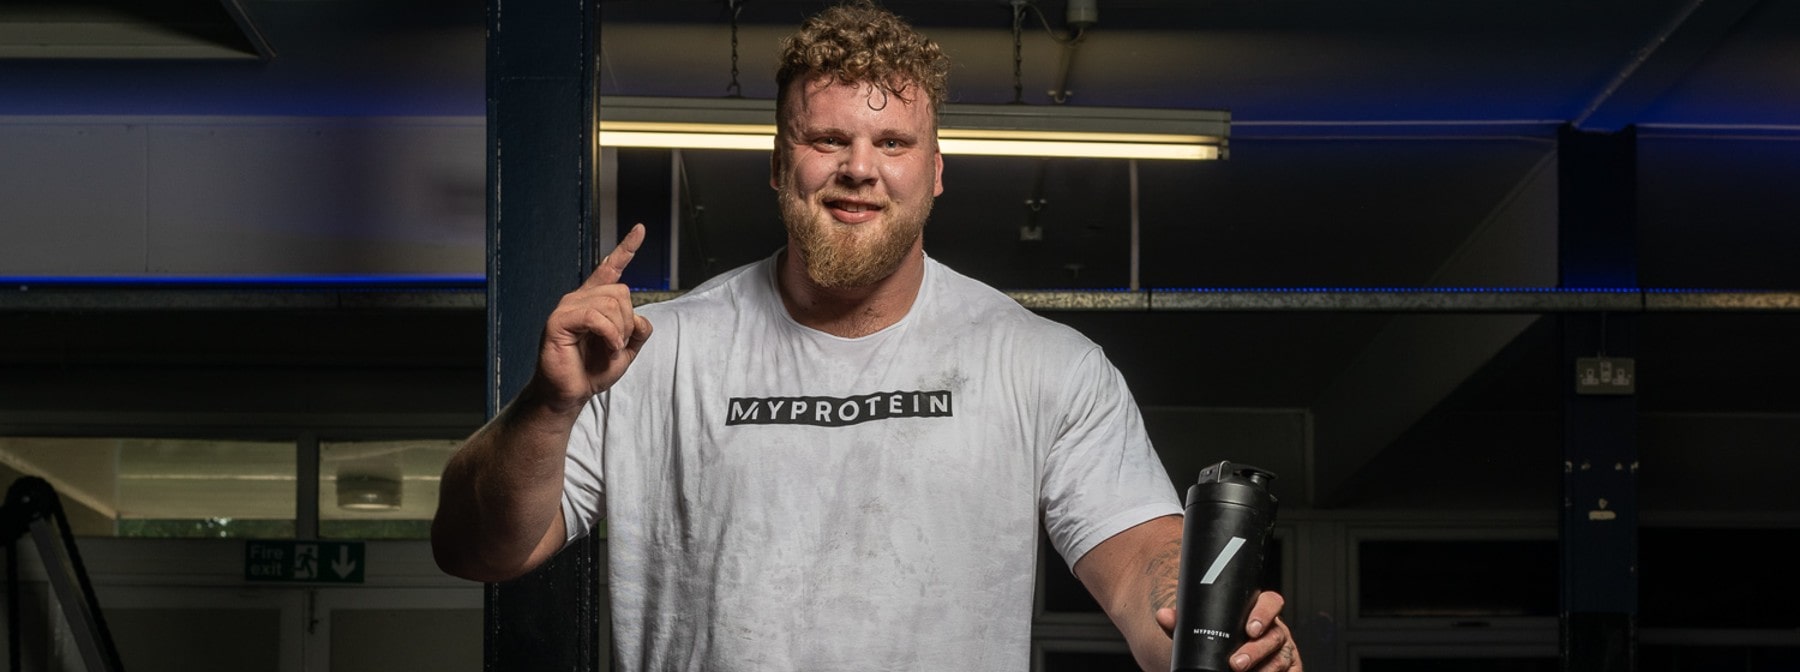 World’s Strongest Man Sees His Autism As A ‘Superpower’